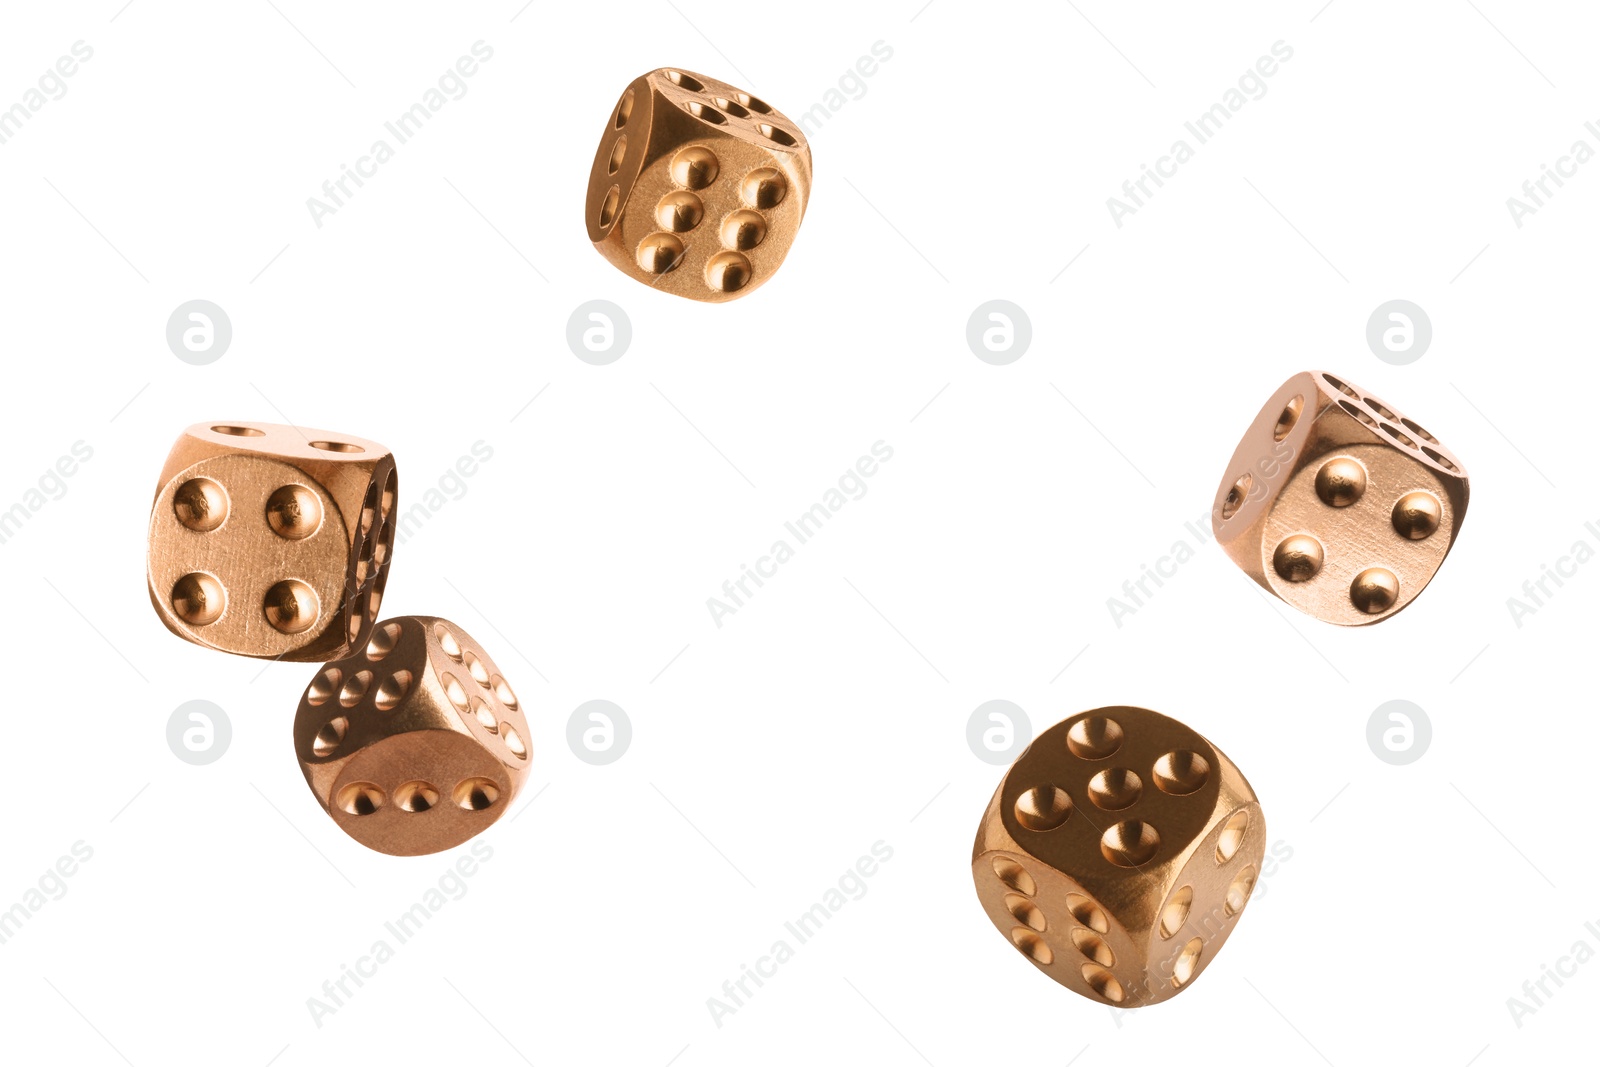 Image of Five golden dice in air on white background